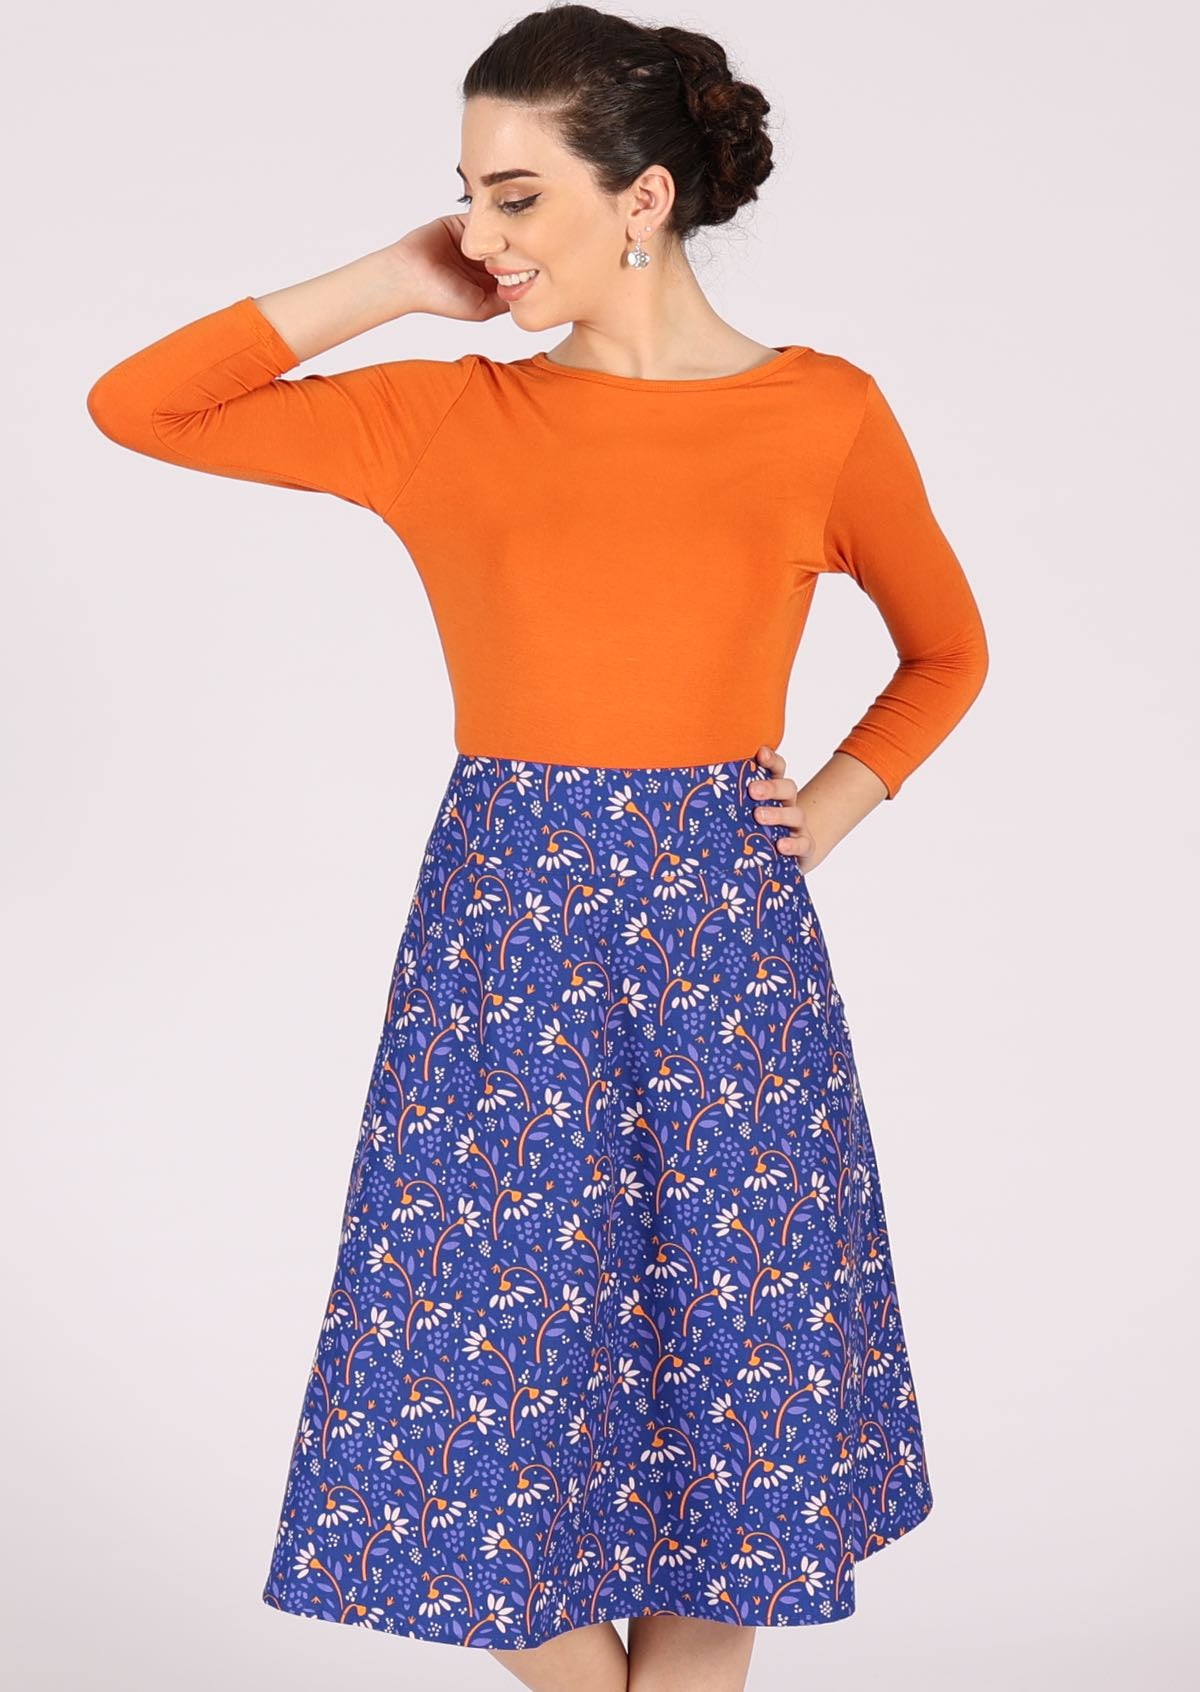 Below knee cotton skirt with funky floral print on blue base